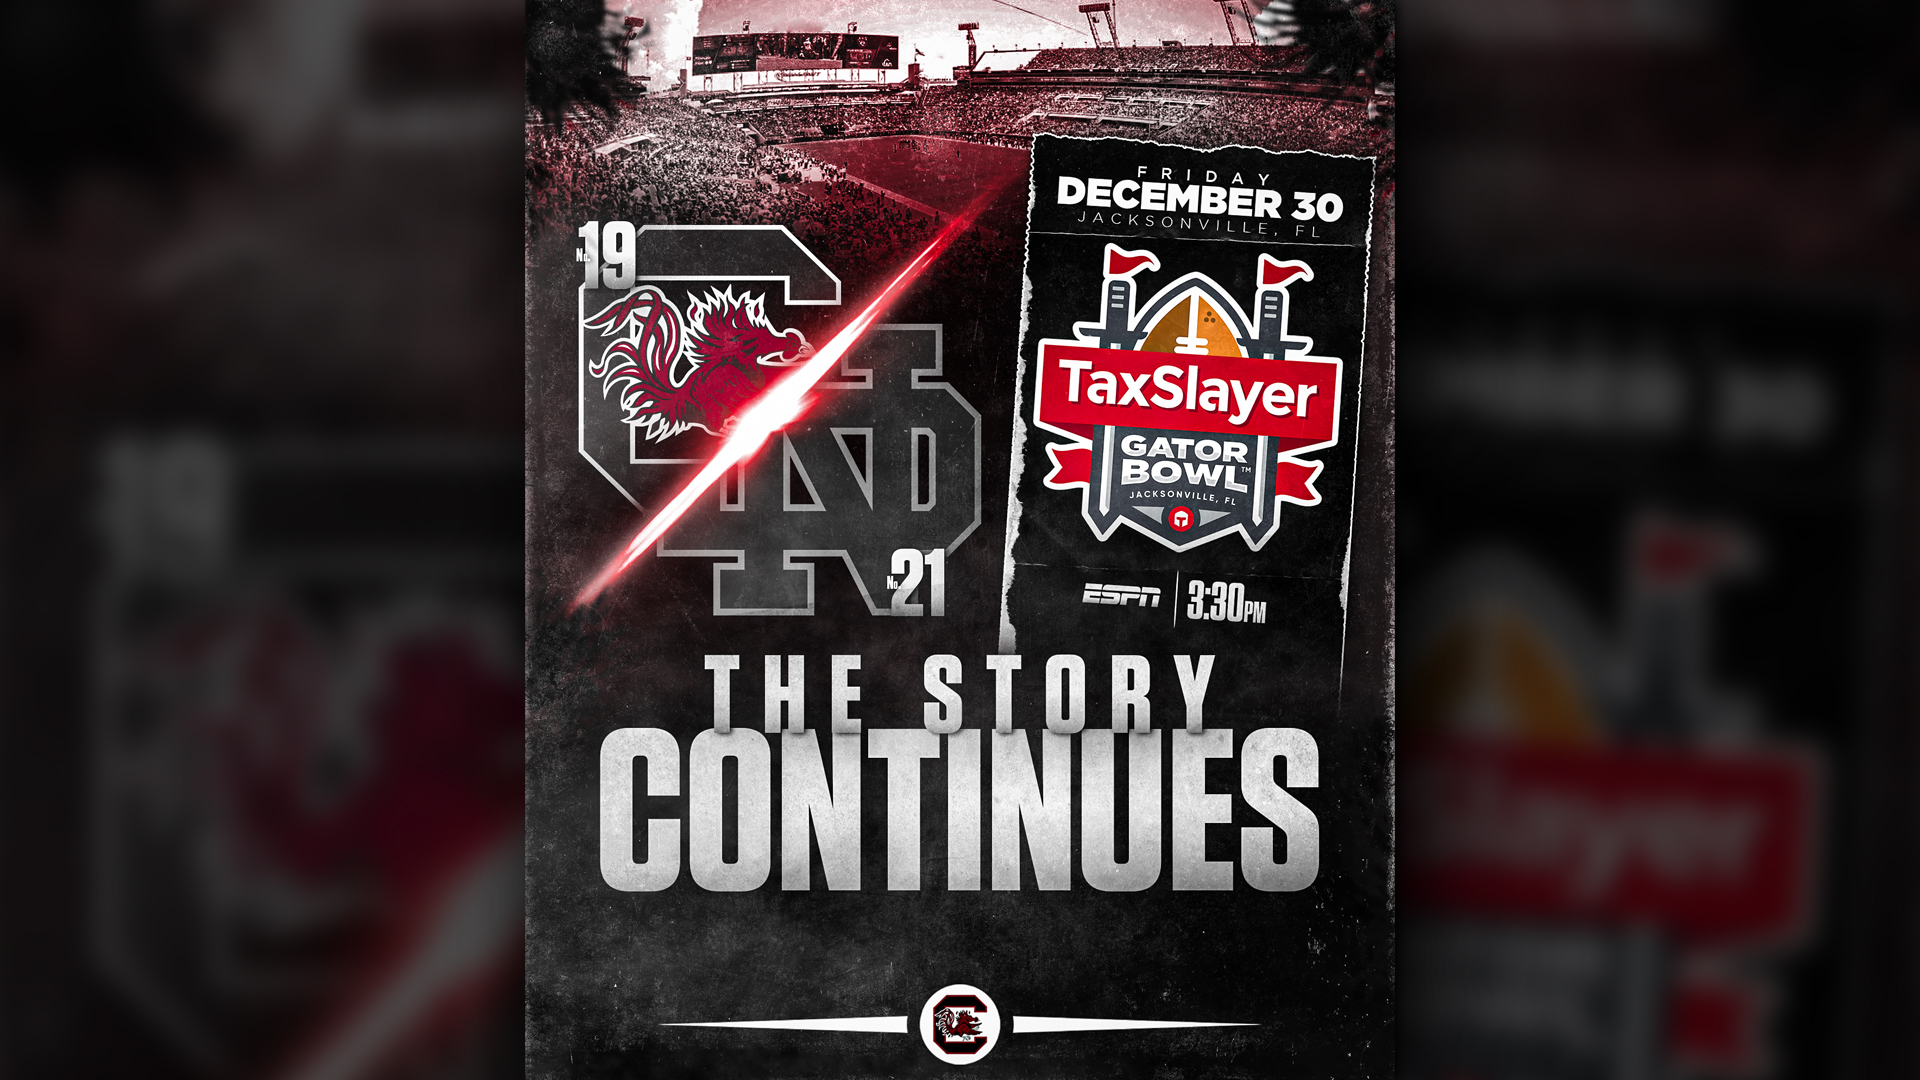 Gamecocks to Face Notre Dame in the TaxSlayer Gator Bowl on Dec. 30